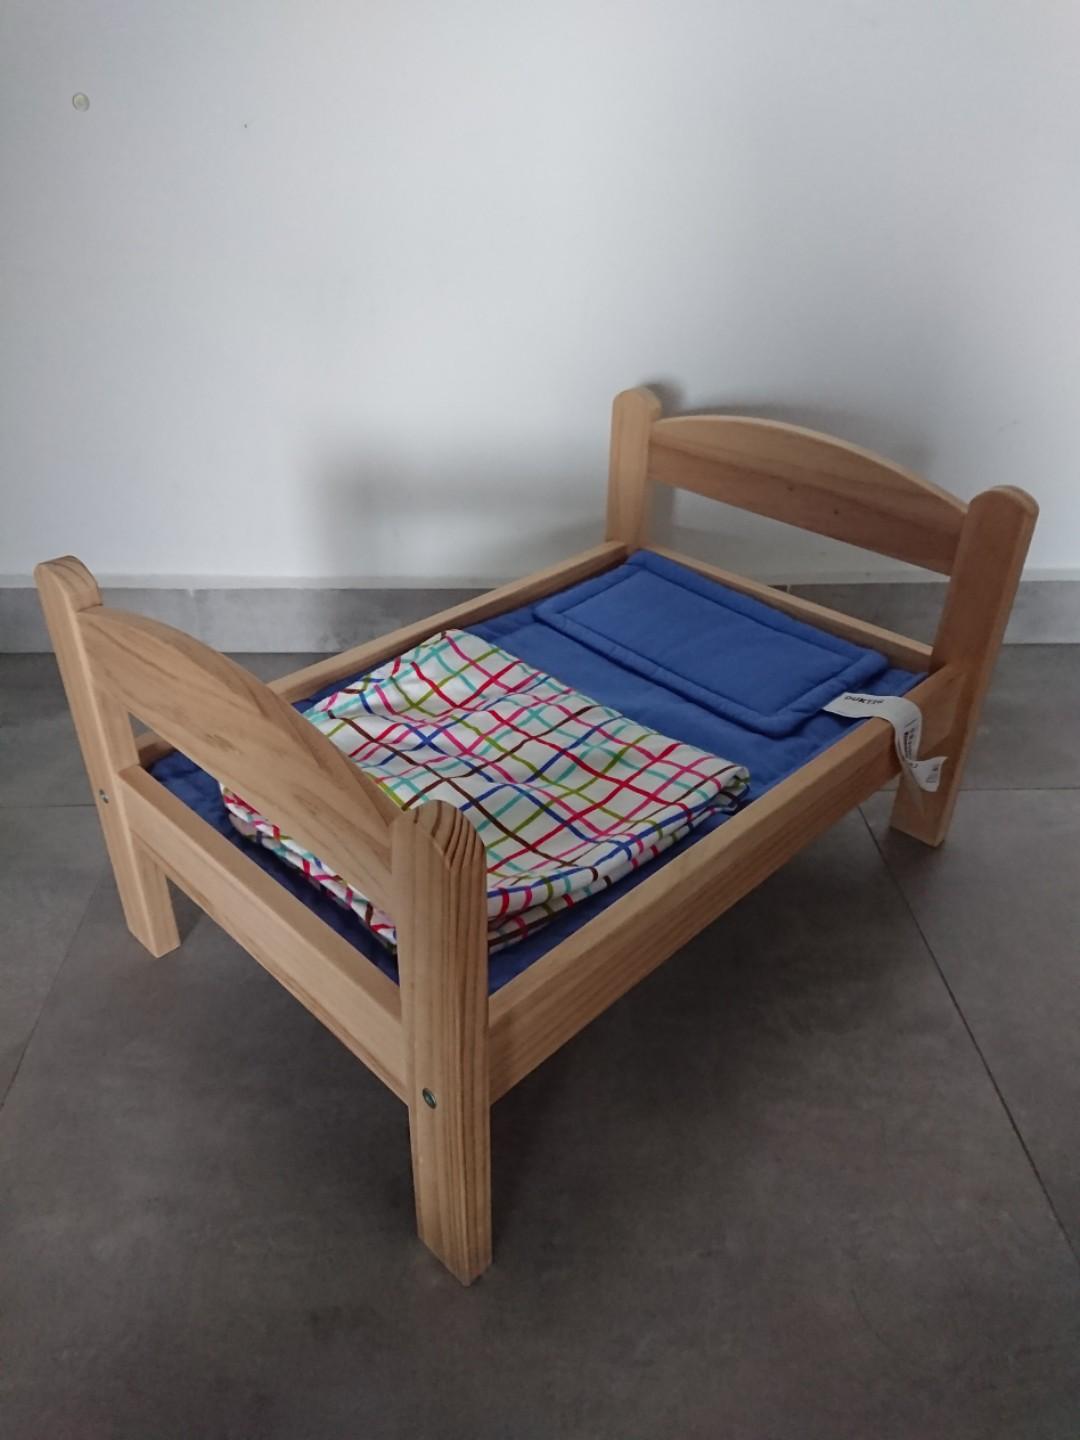 ikea toy bed